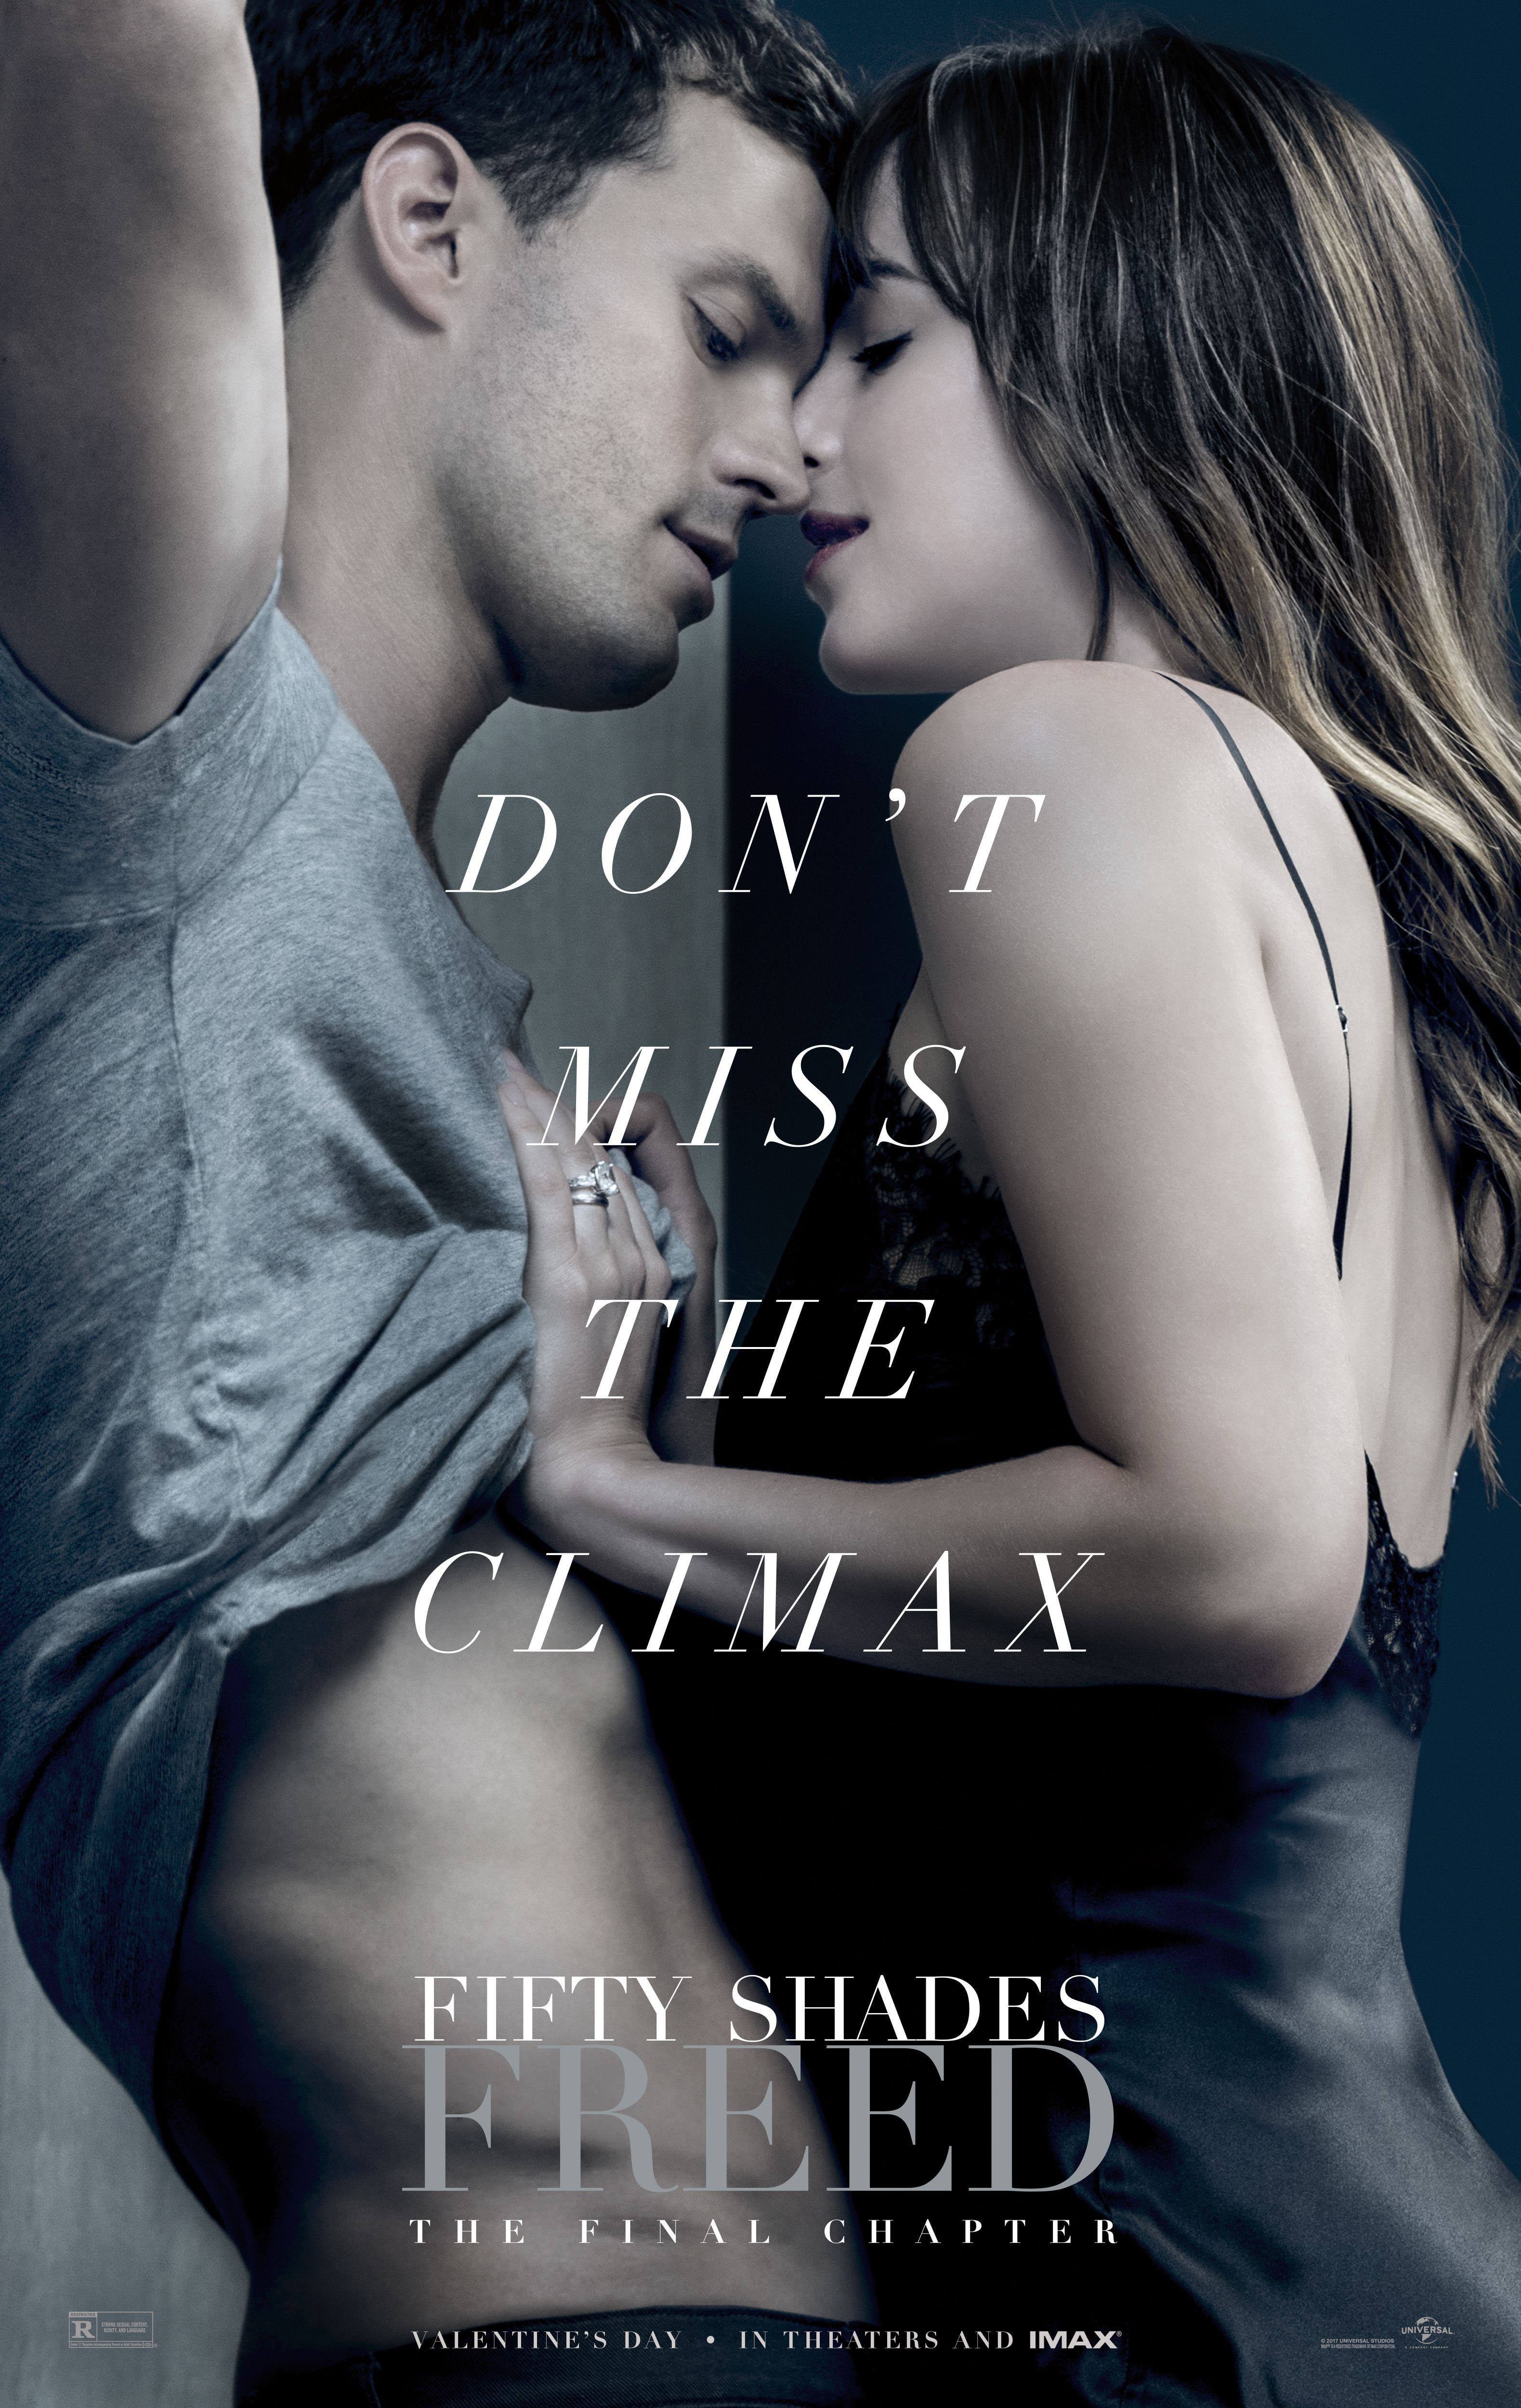 Is Fifty Shades Freed Feminist Popsugar Entertainment 